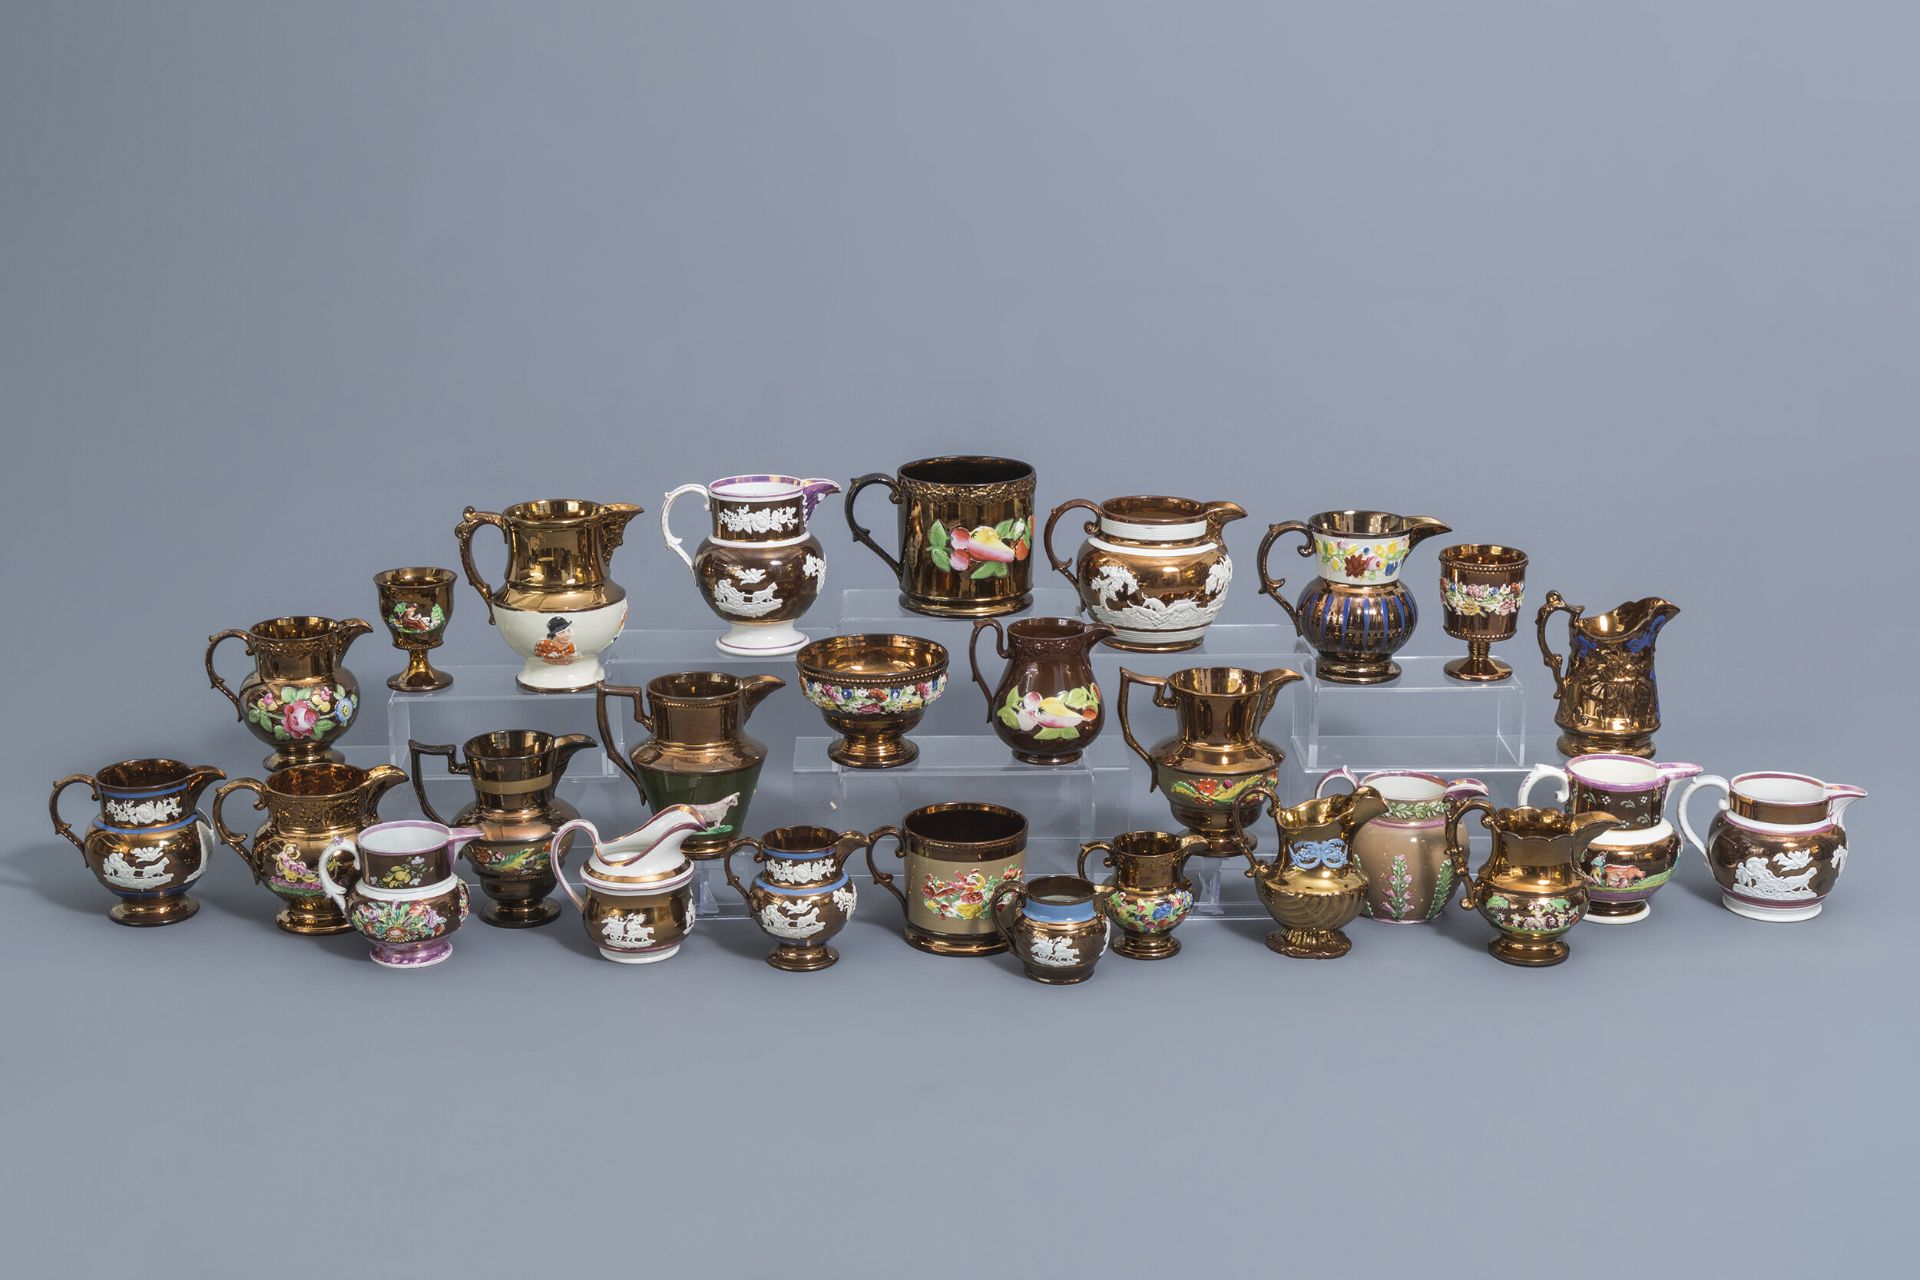 A varied collection of English lustreware items with relief design, 19th C. - Image 2 of 50